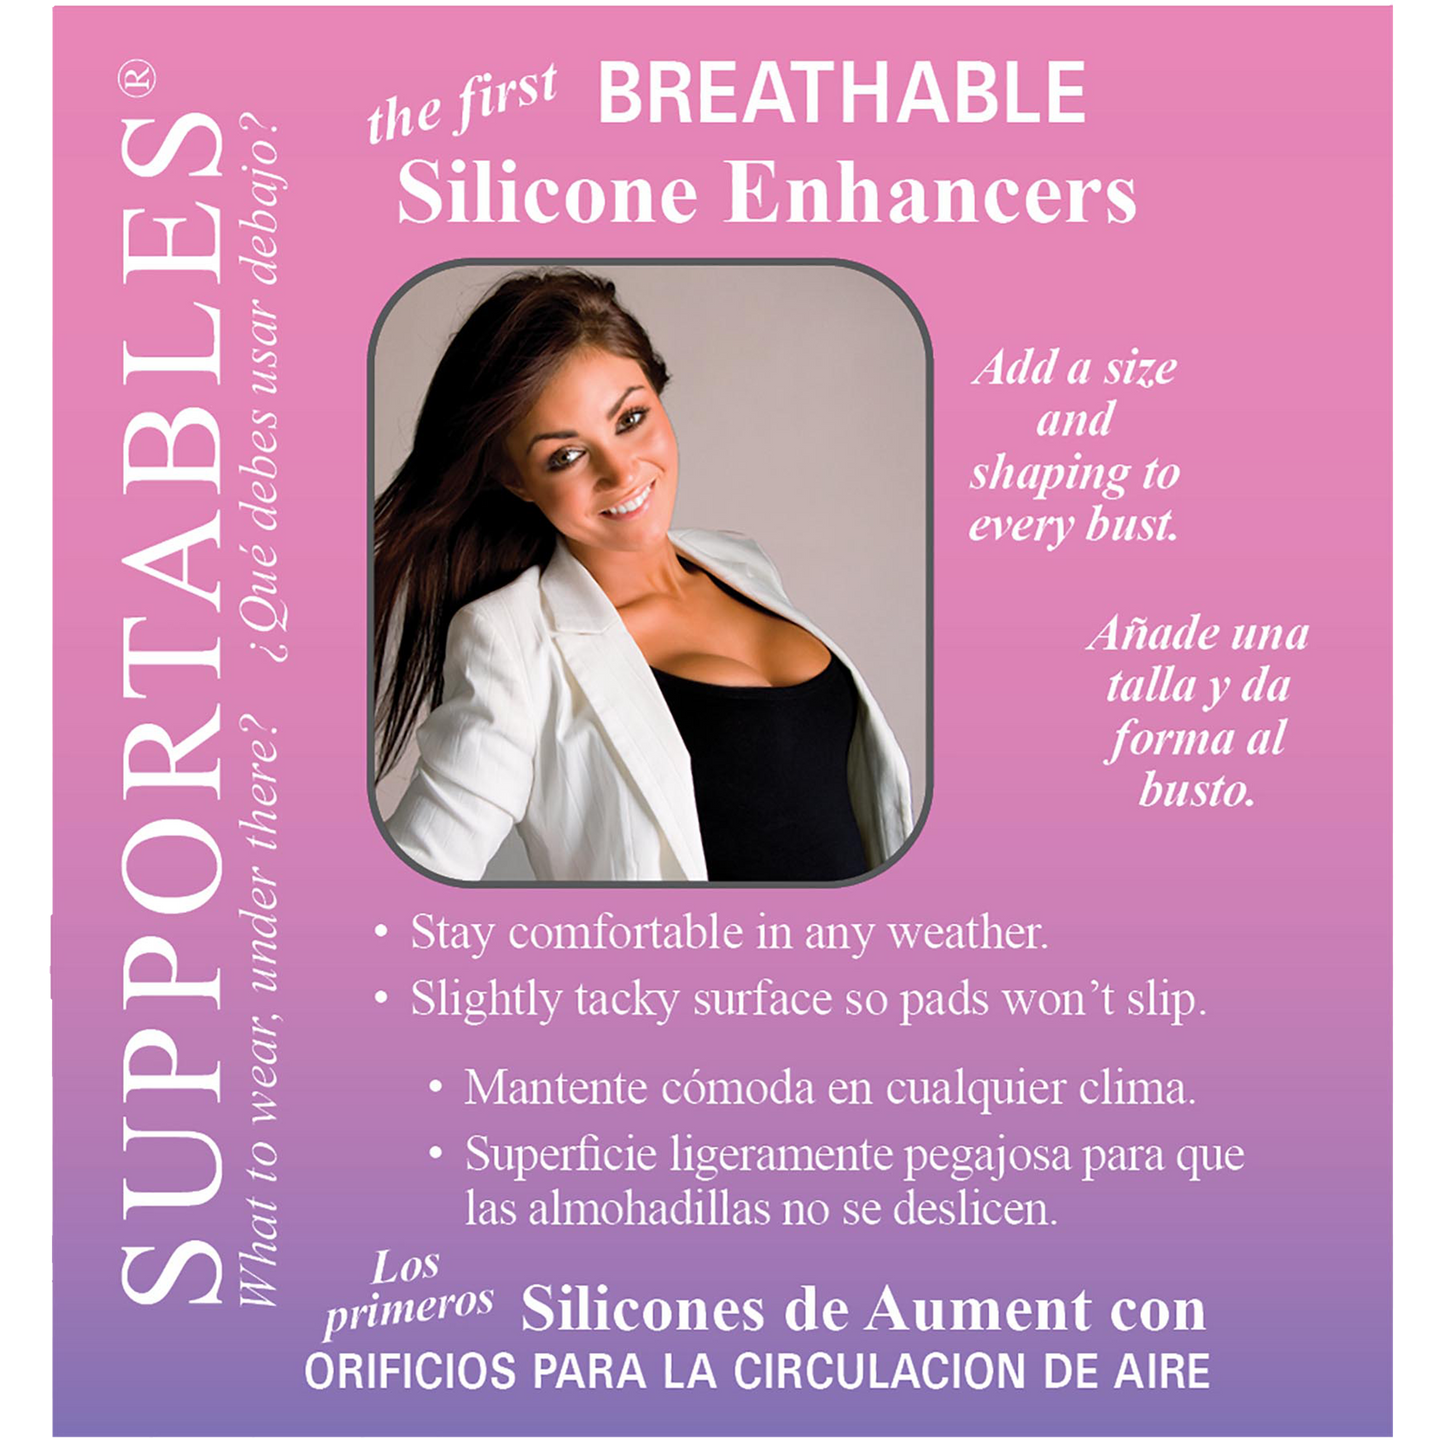 BREATHABLE SILICONE